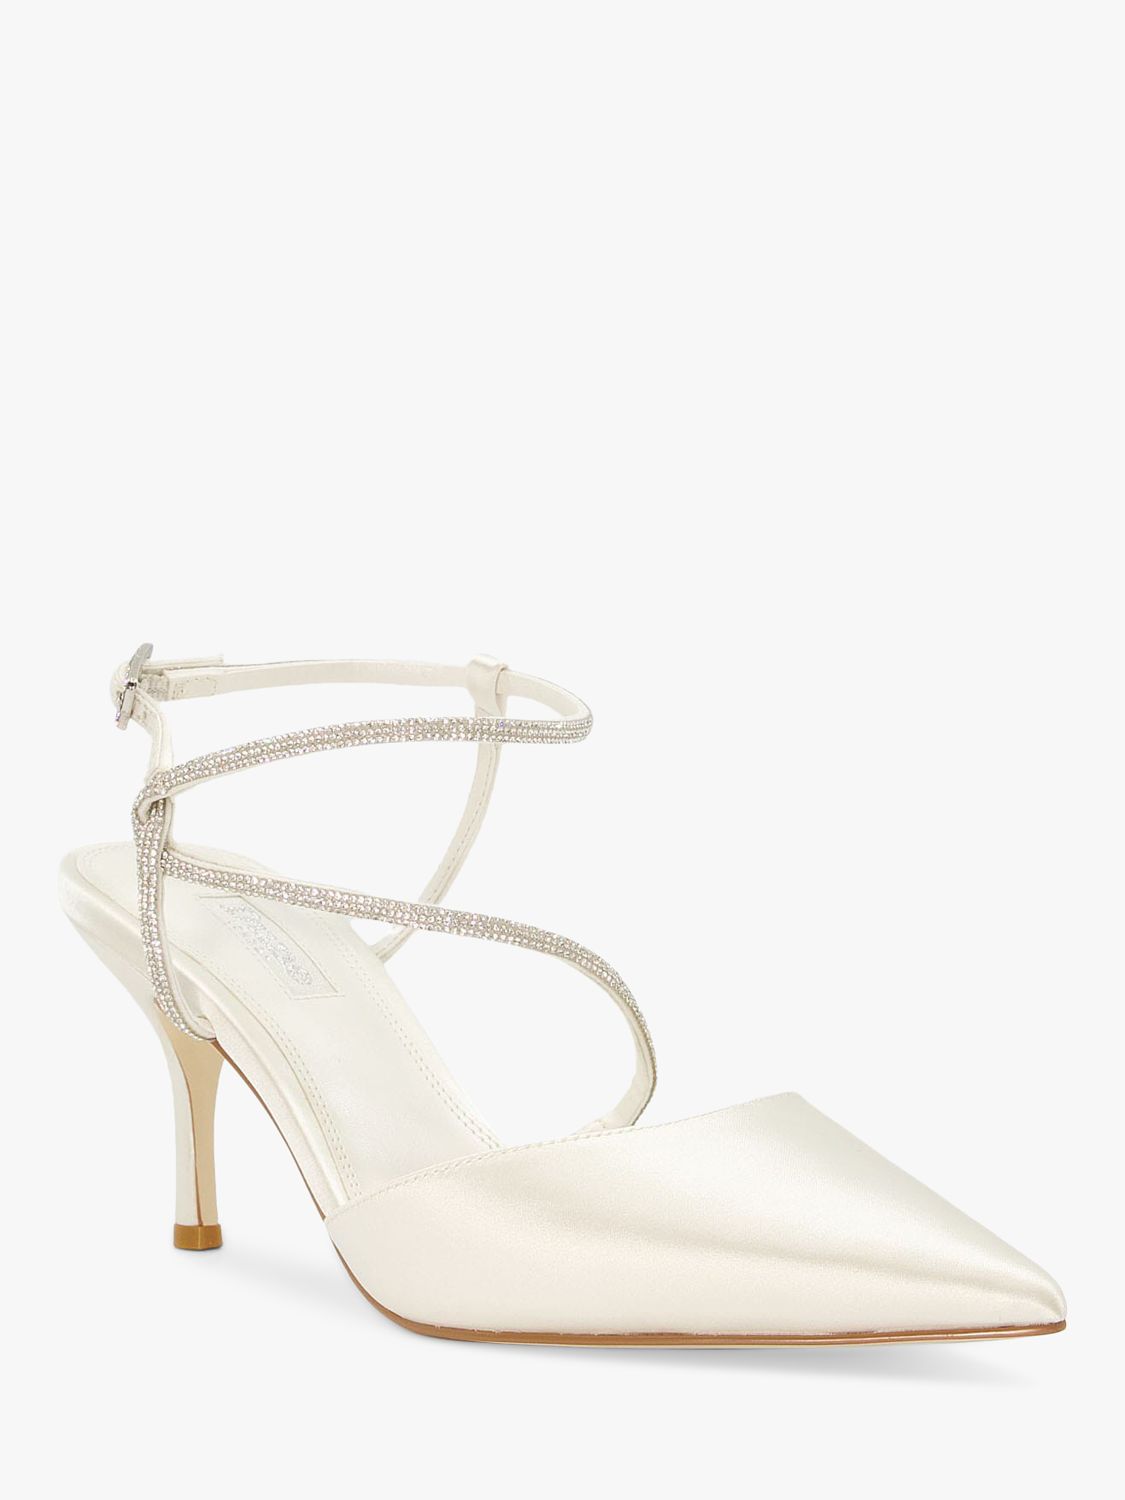 Dune Bridal Collection Clarrise Satin Court Shoes, Ivory